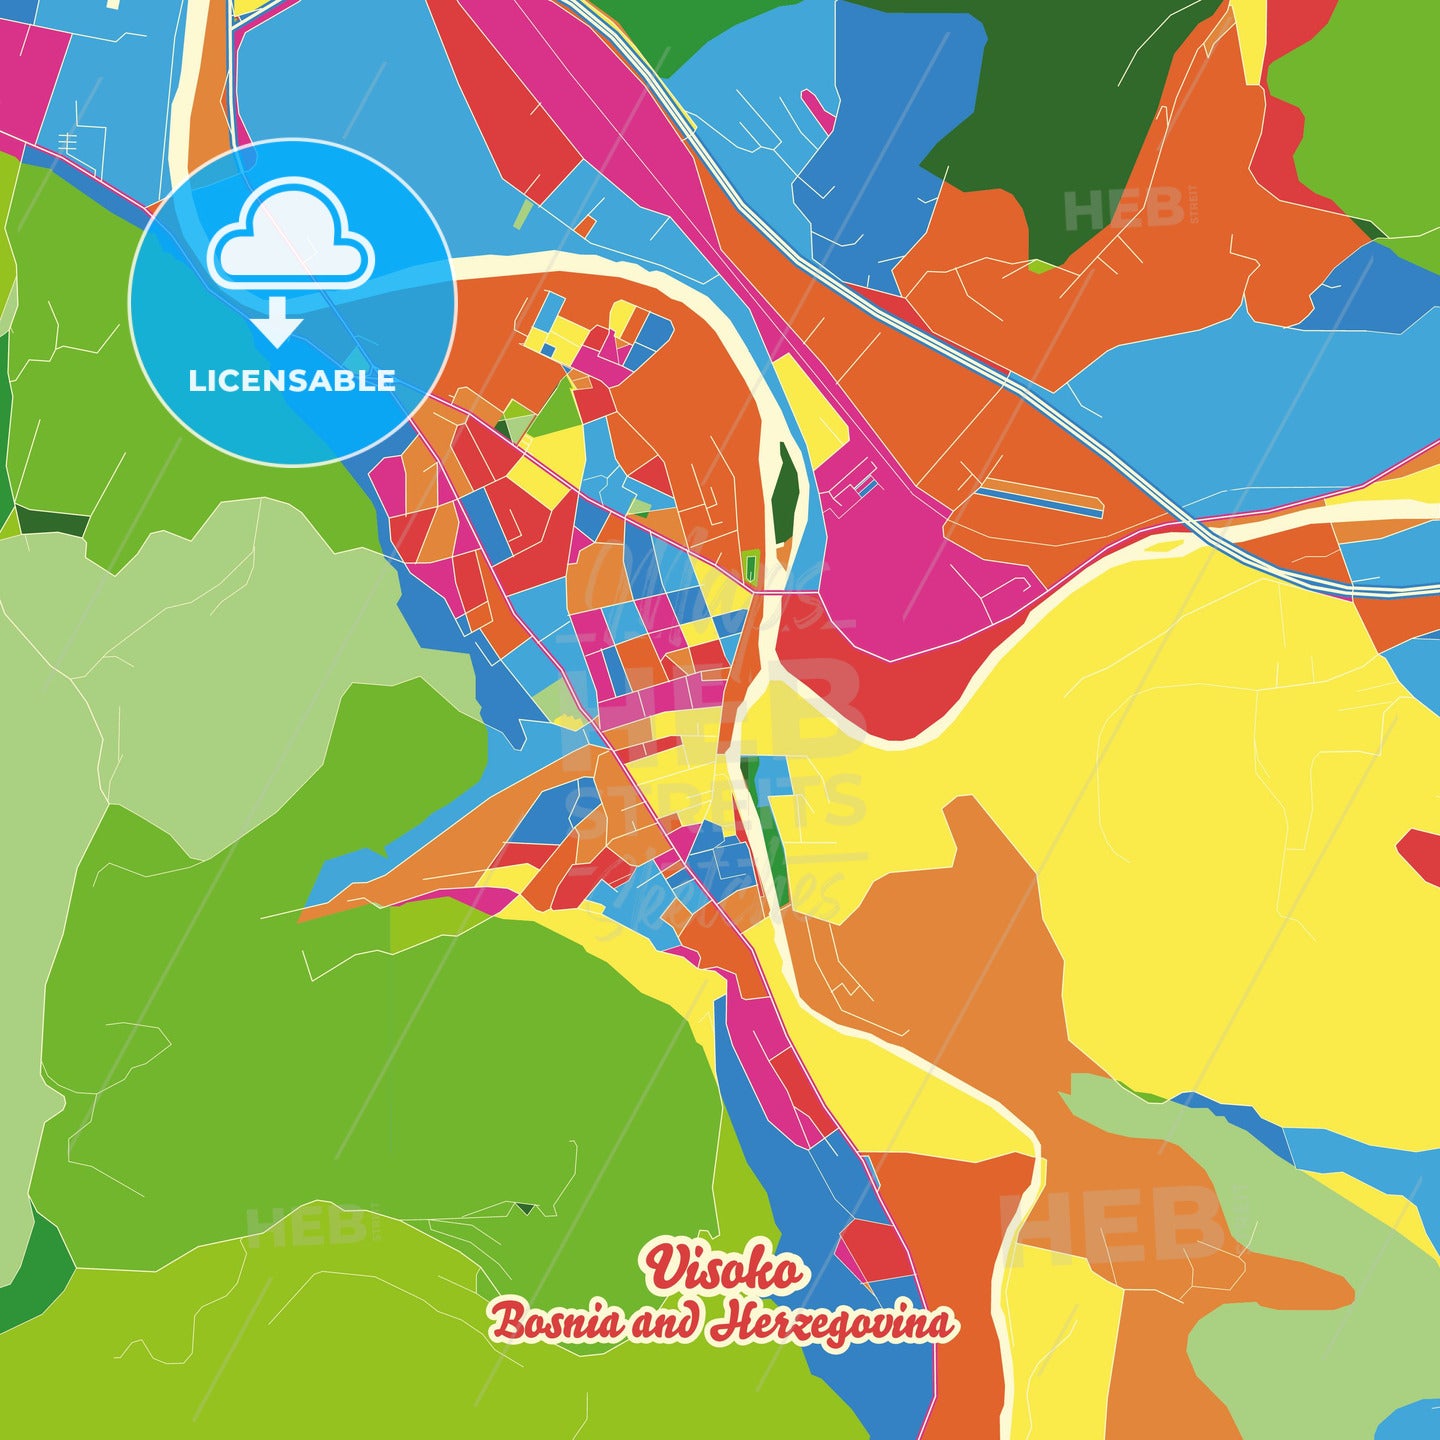 Visoko, Bosnia and Herzegovina Crazy Colorful Street Map Poster Template - HEBSTREITS Sketches